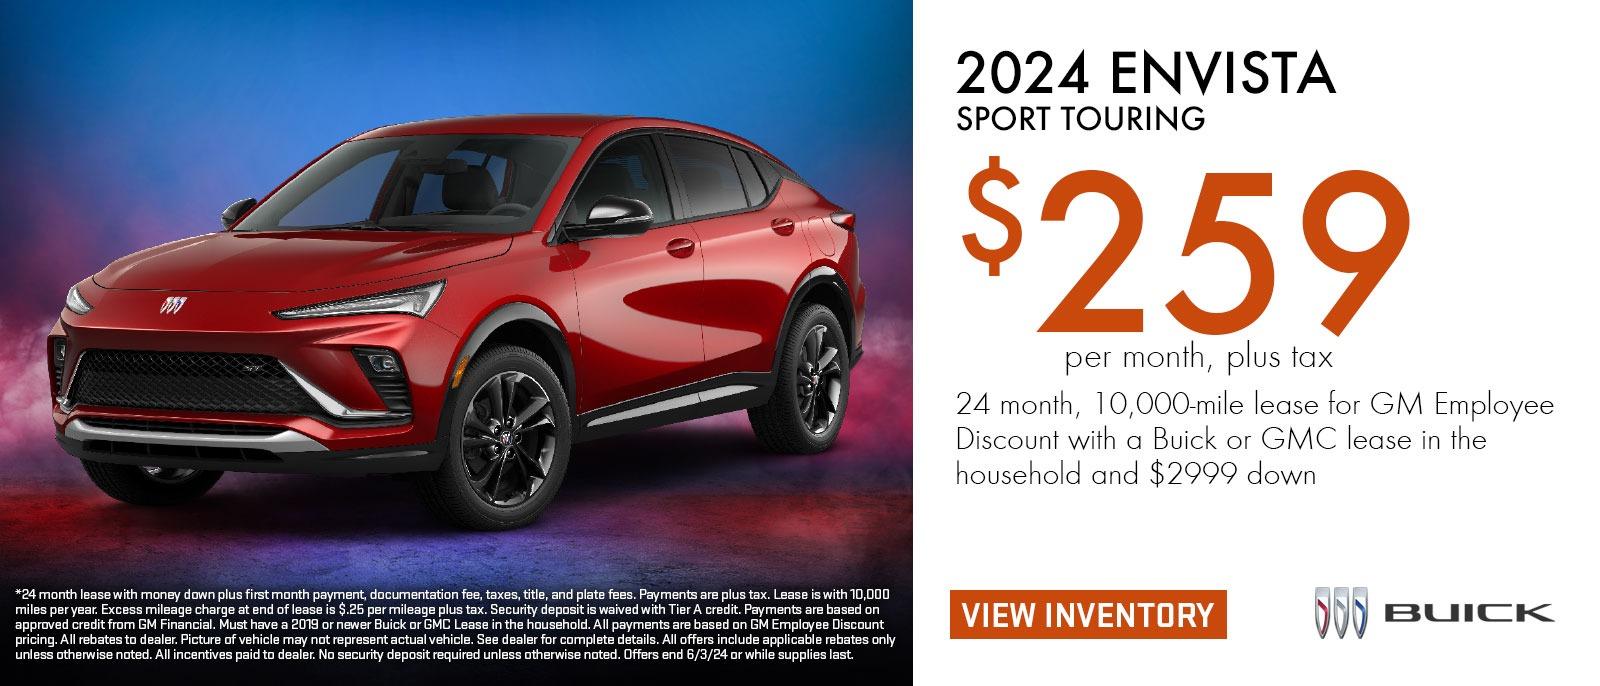 2024 Envista Sport Touring
$259 per month, plus tax*
24 months, 10,000-mile lease for GM Employee Discount with a Buick or GMC lease in the household and $2999 down